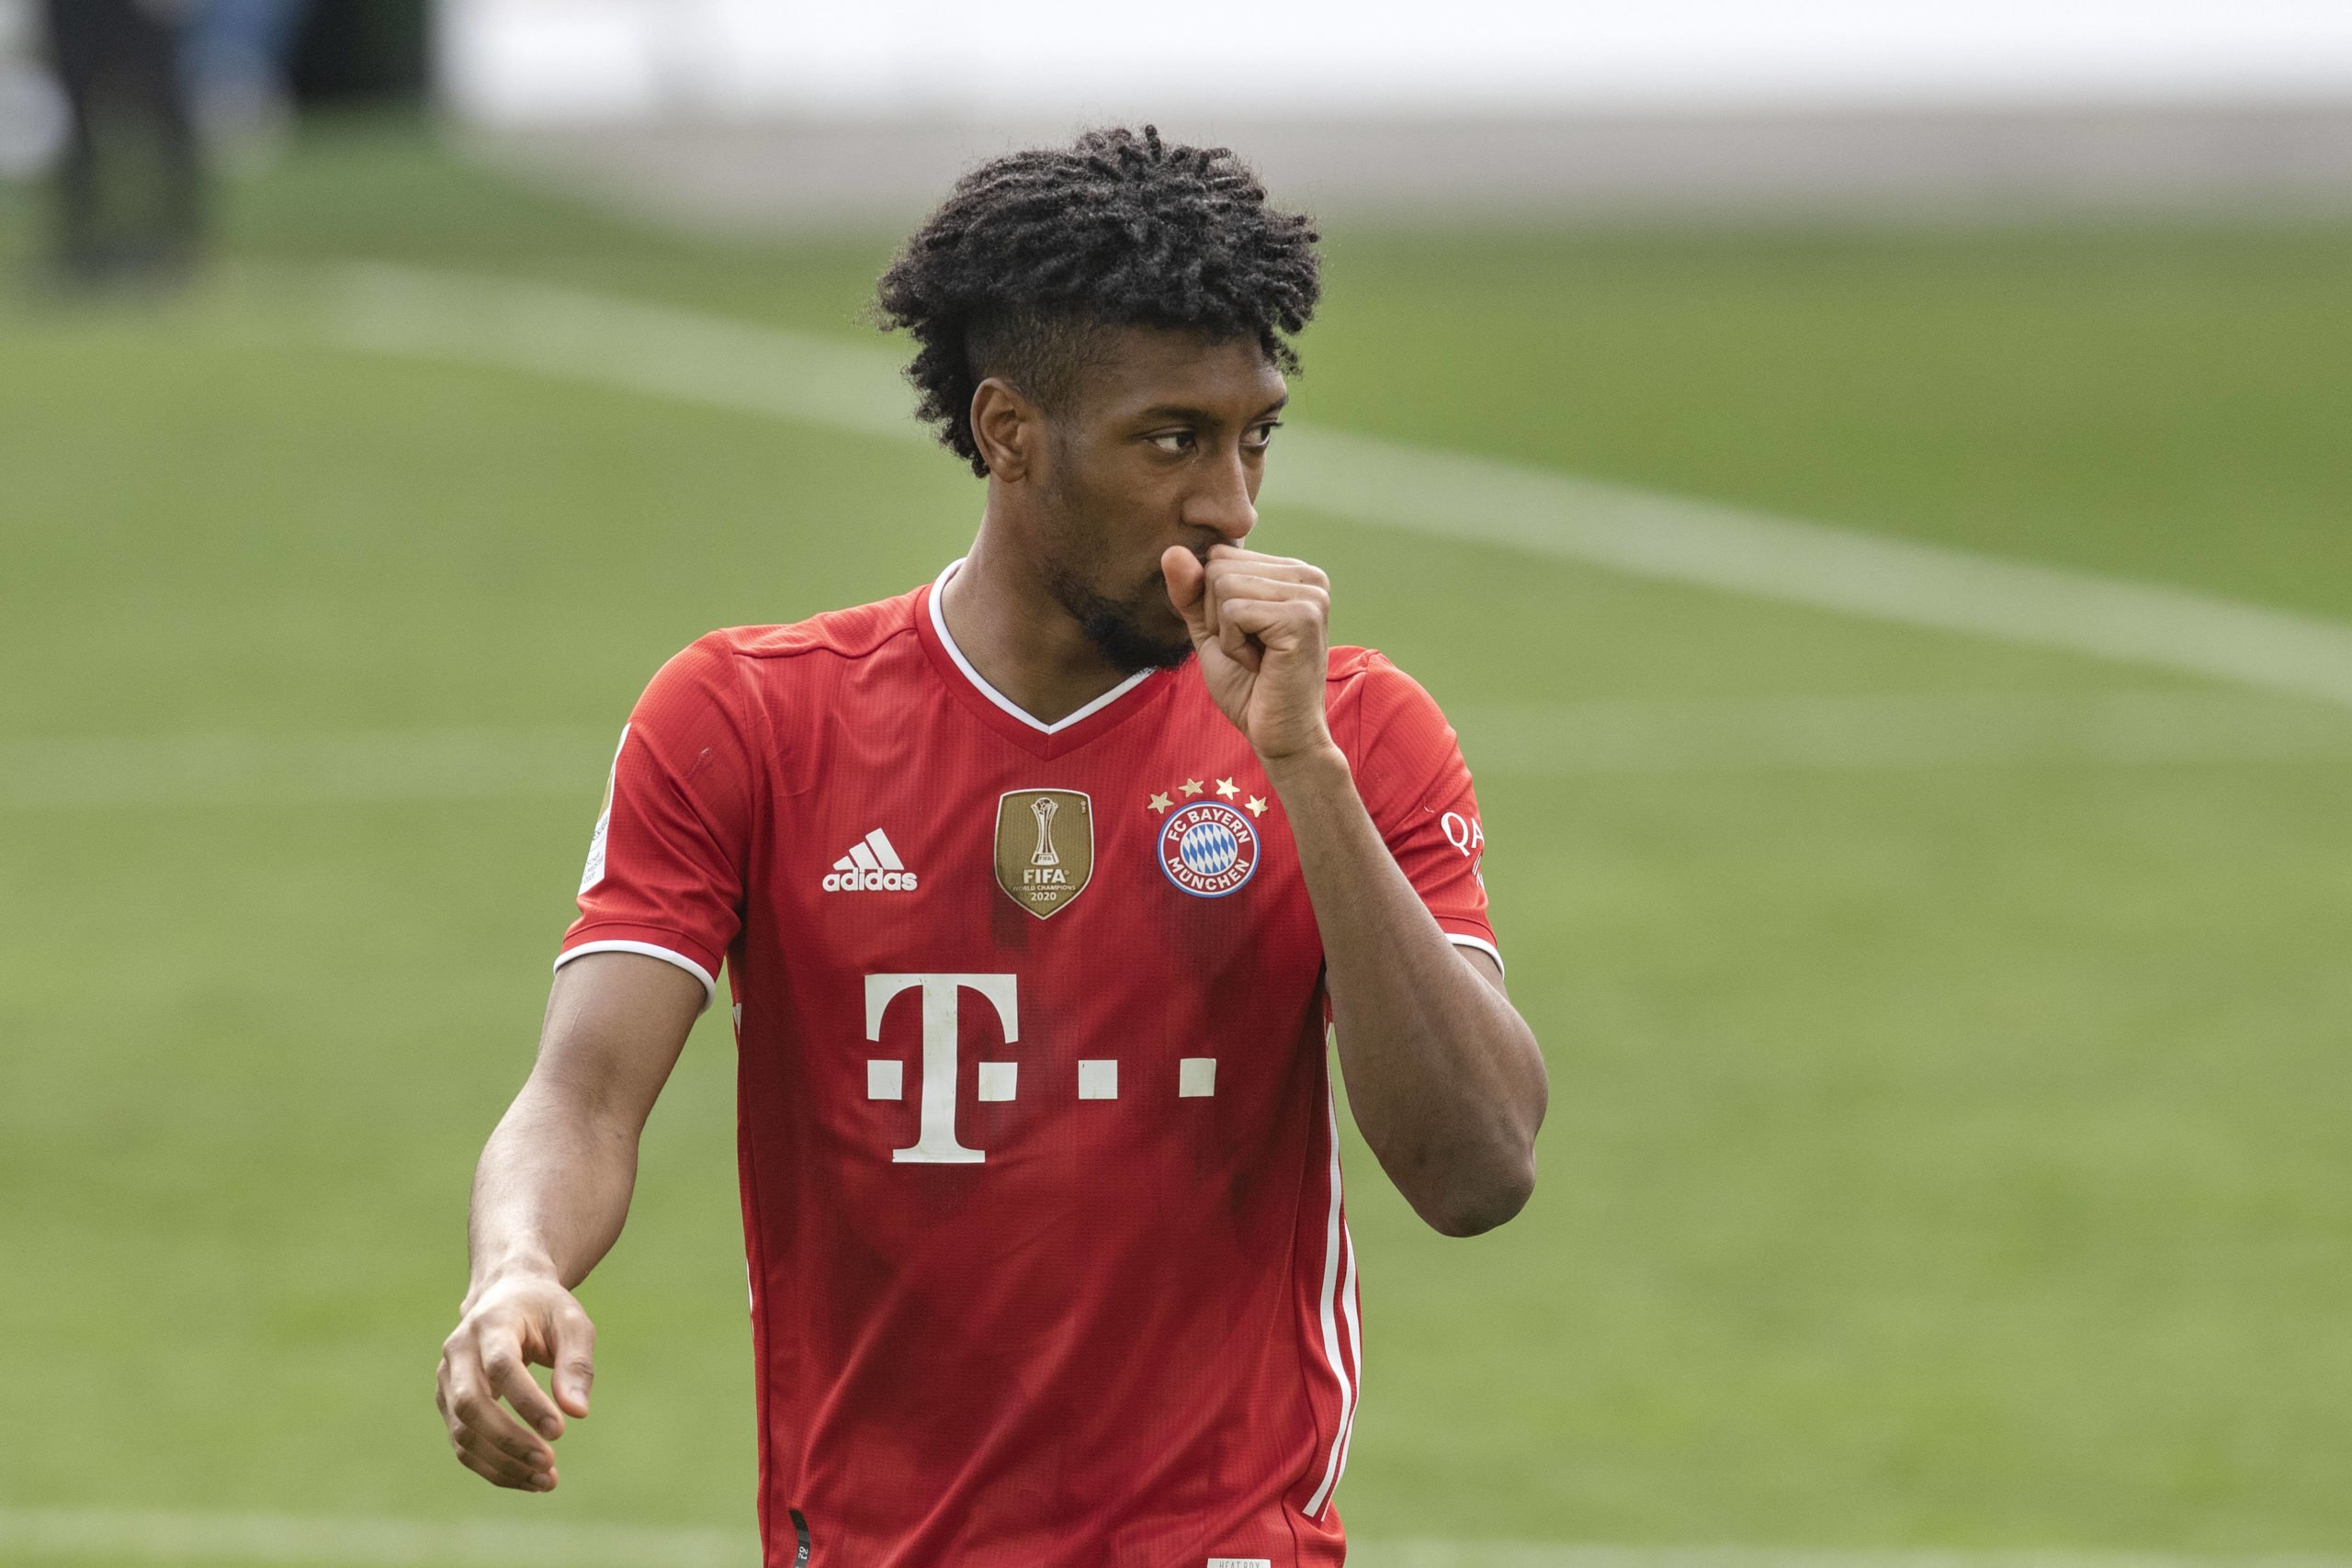 Chelsea are among clubs interested in Kingsley Coman - Not a good option.